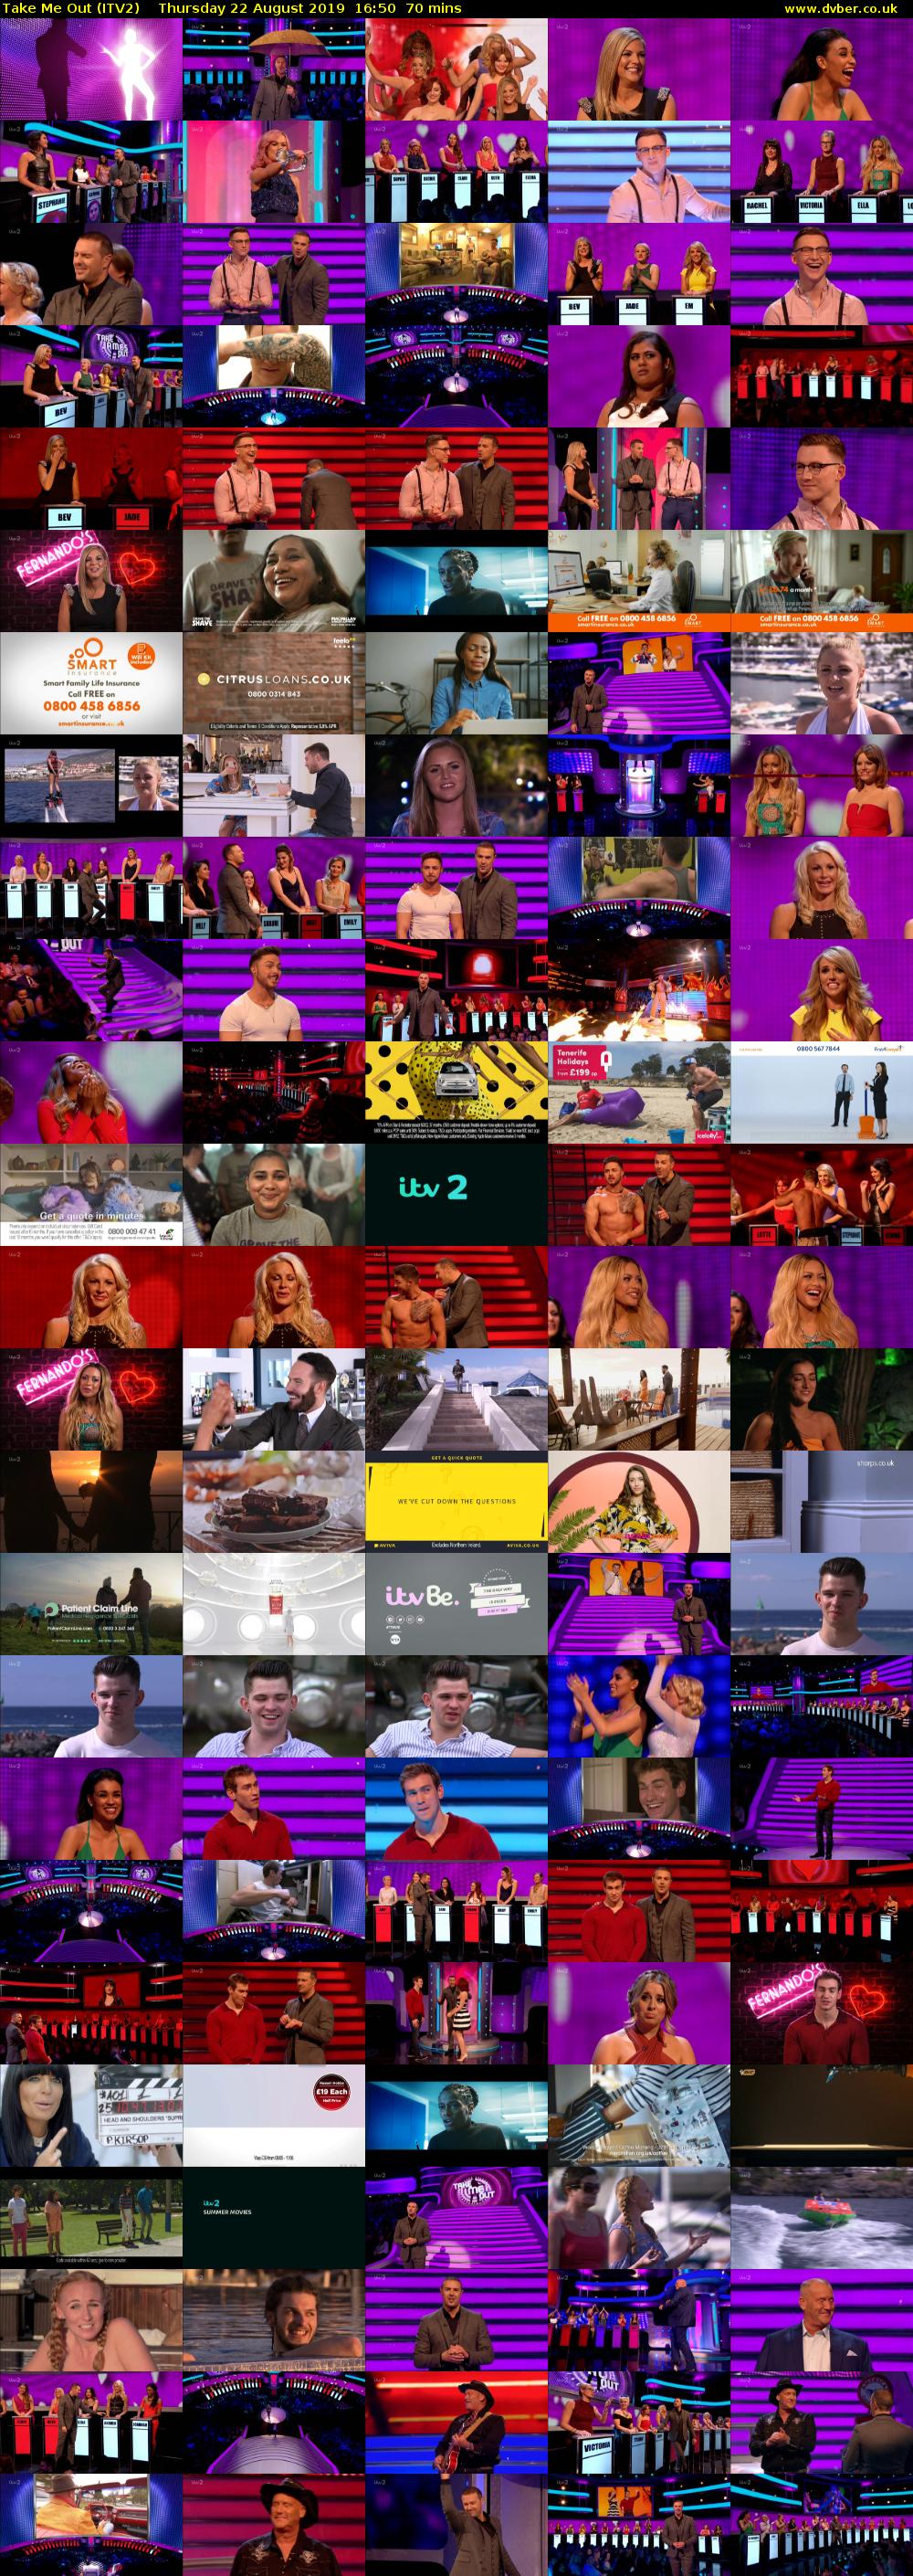 Take Me Out (ITV2) Thursday 22 August 2019 16:50 - 18:00